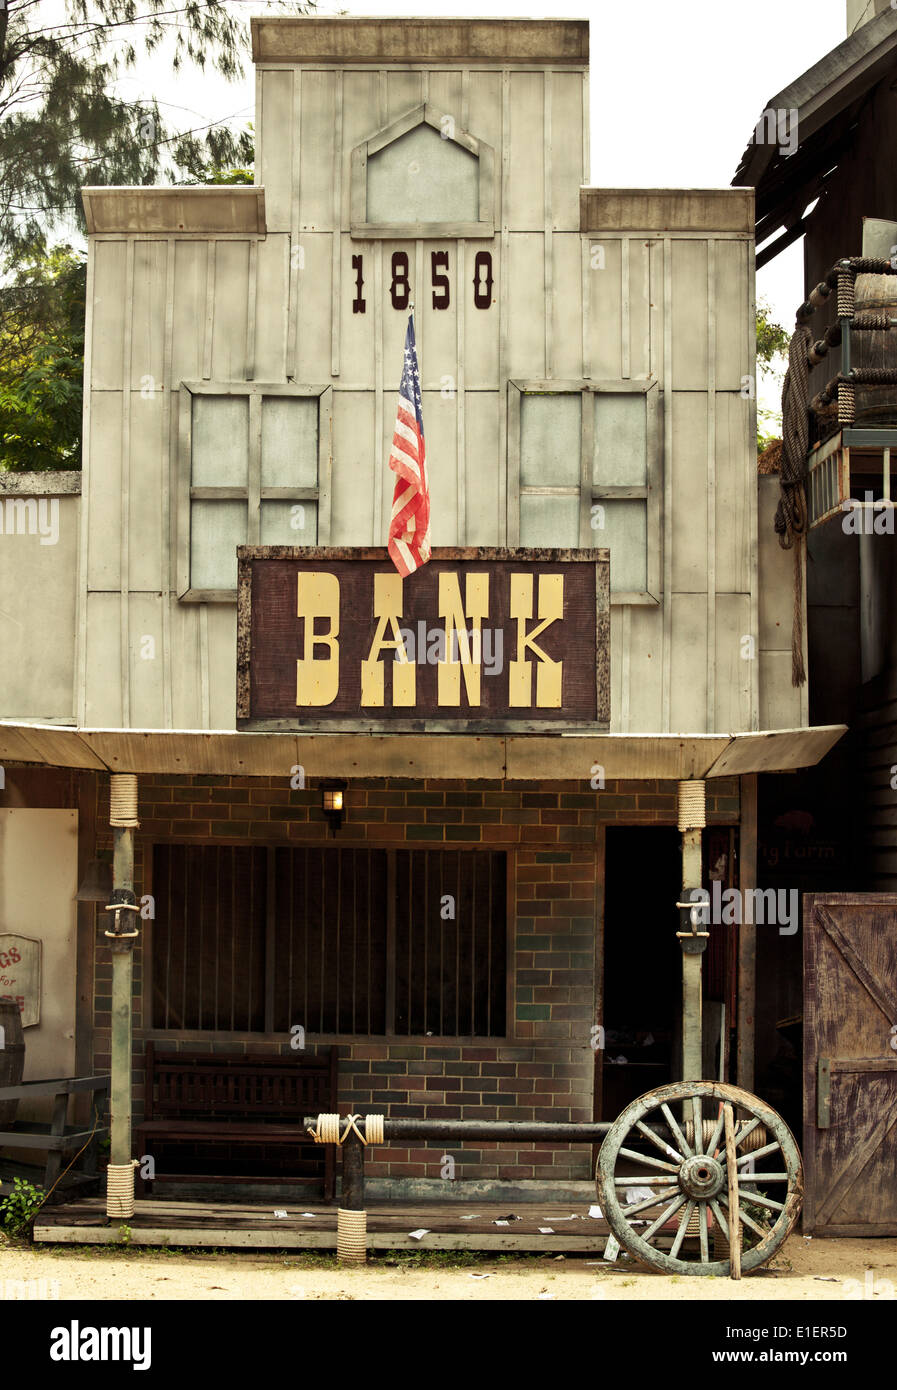 Bank in Wild West style Stock Photo - Alamy